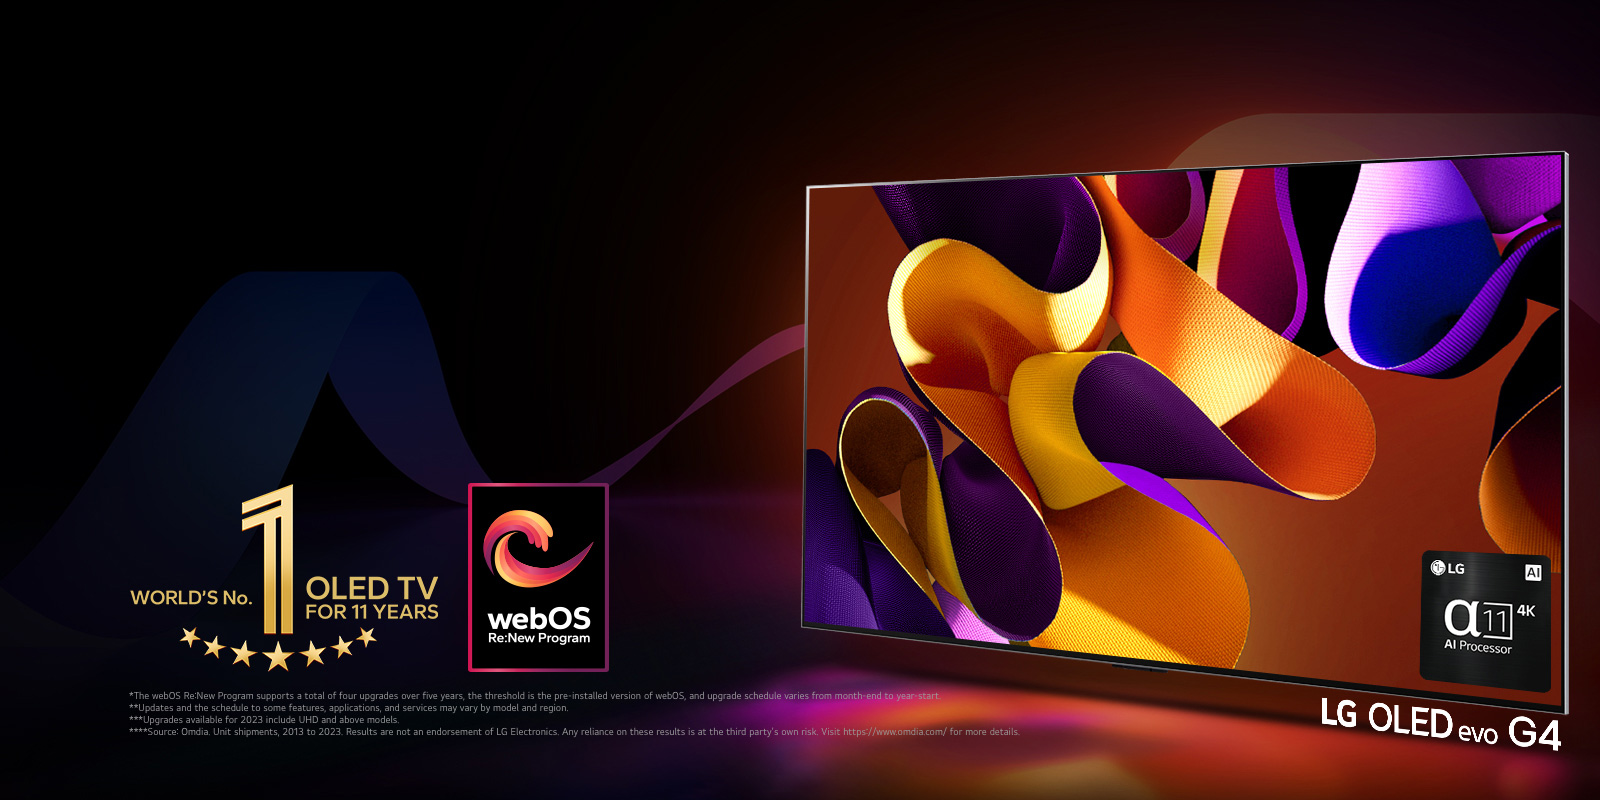 LG OLED evo TV G4 with an abstract, colorful artwork on screen against a black backdrop with subtle swirls of color. Light radiates from the screen, casting colorful shadows. The alpha 11 AI Processor 4K is at the bottom right corner of the TV screen. The "World's number 1 OLED TV for 11 Years" emblem and "webOS Re:New Program" logo are in the image. A disclaimer reads: "The webOS Re:New Program supports a total of four upgrades over five years, the threshold is the pre-installed version of webOS, and upgrade schedule varies from month-end to year-start."  "Updates and the schedule to some features, applications, and services may vary by model and region."  "Upgrades available for 2023 include UHD and above models." "Source: Omdia. Unit shipments, 2013 to 2023. Results are not an endorsement of LG Electronics. Any reliance on these results is at the third party’s own risk. Visit https://www.omdia.com/ for more details."